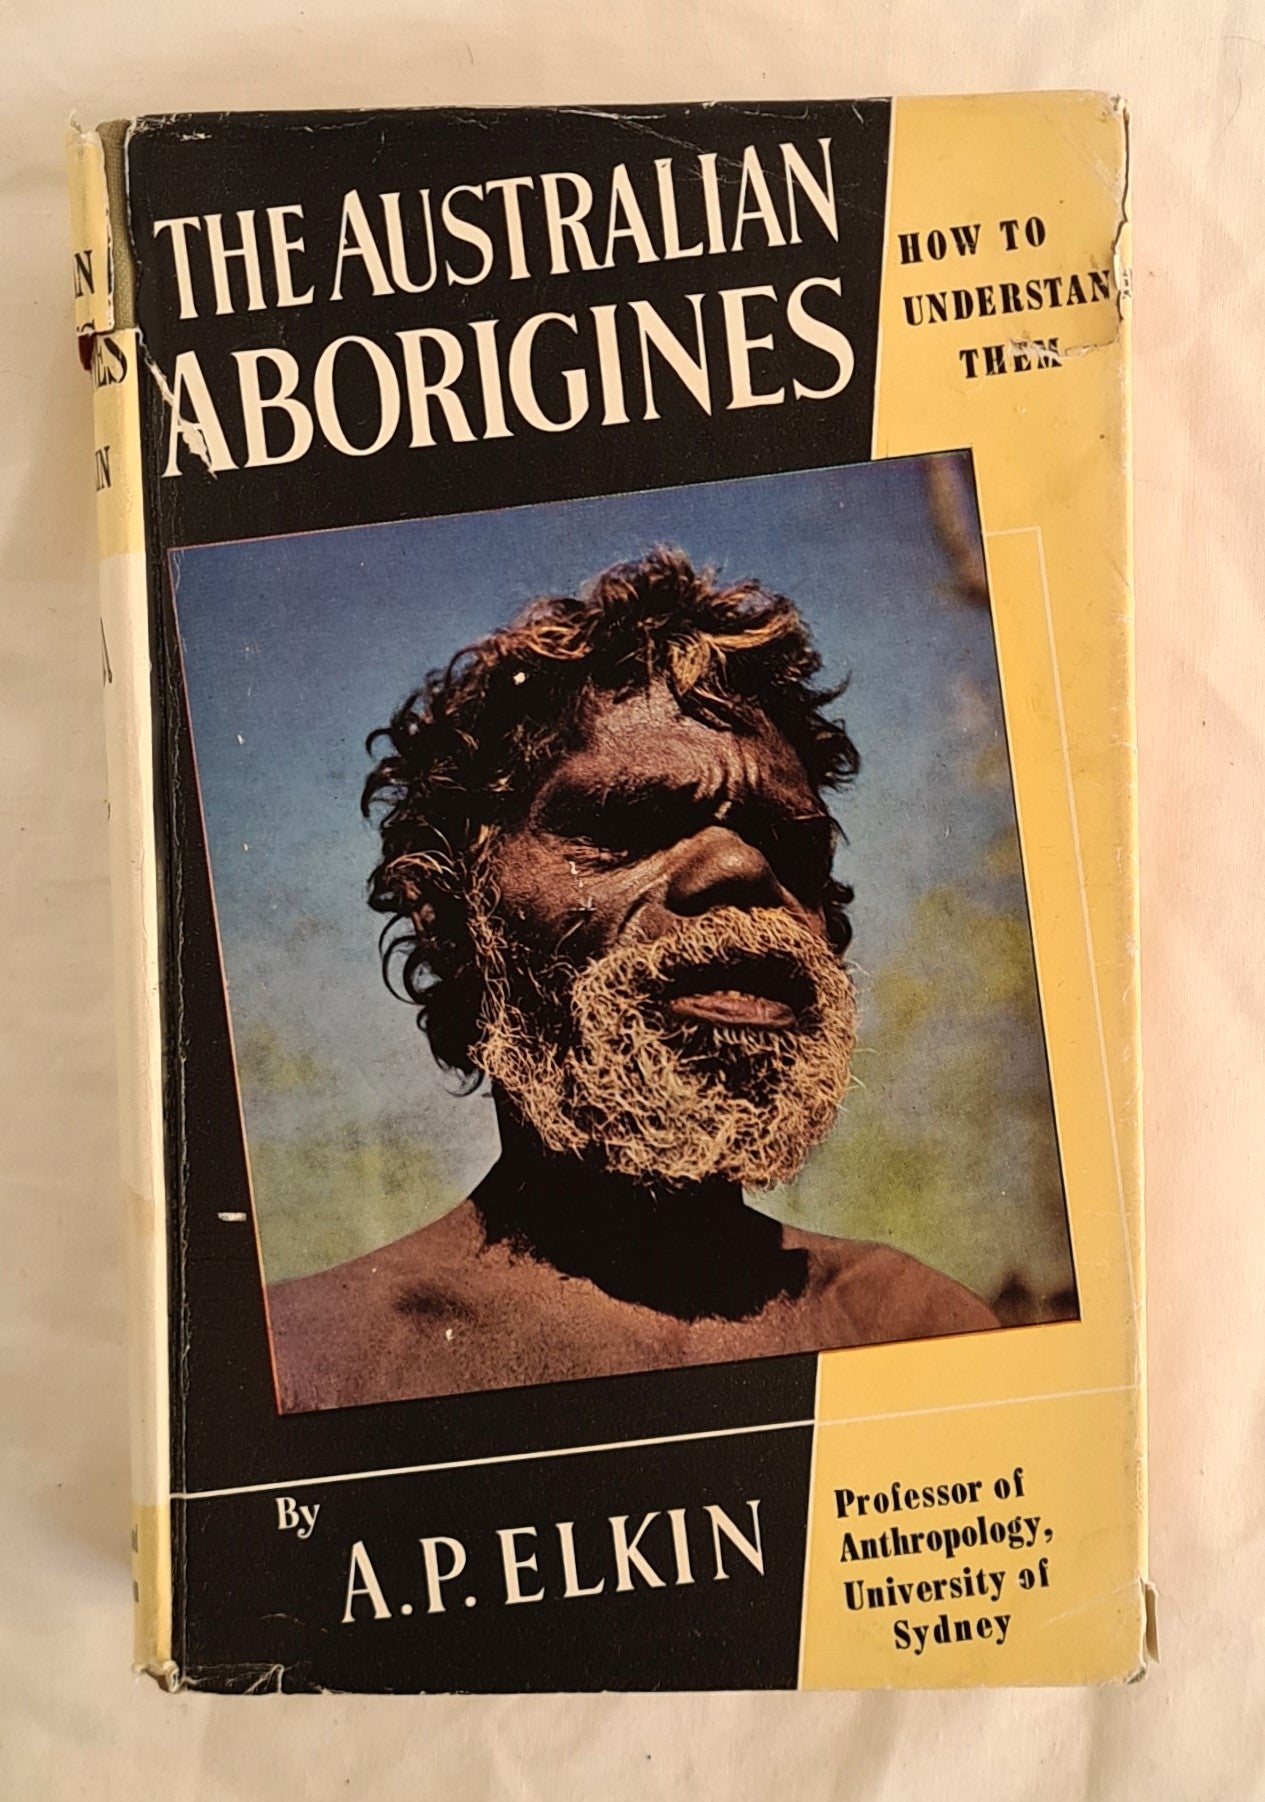 The Australian Aborigines  How to Understand Them  by A. P. Elkin